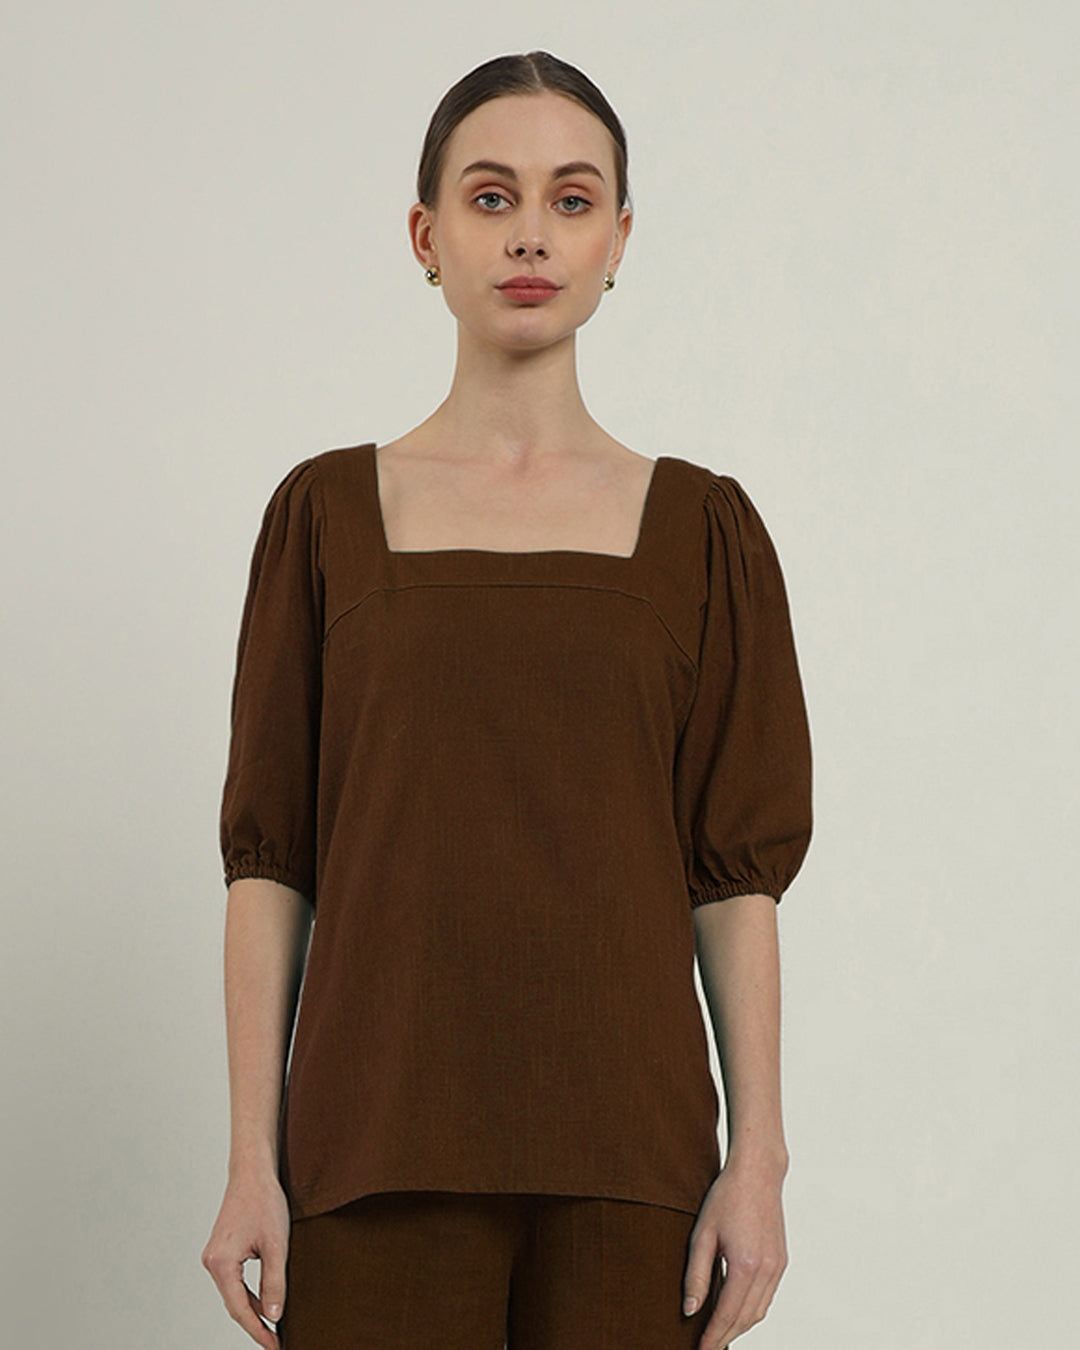 Nutshell Urbanite Square Neck Top (Without Bottoms)